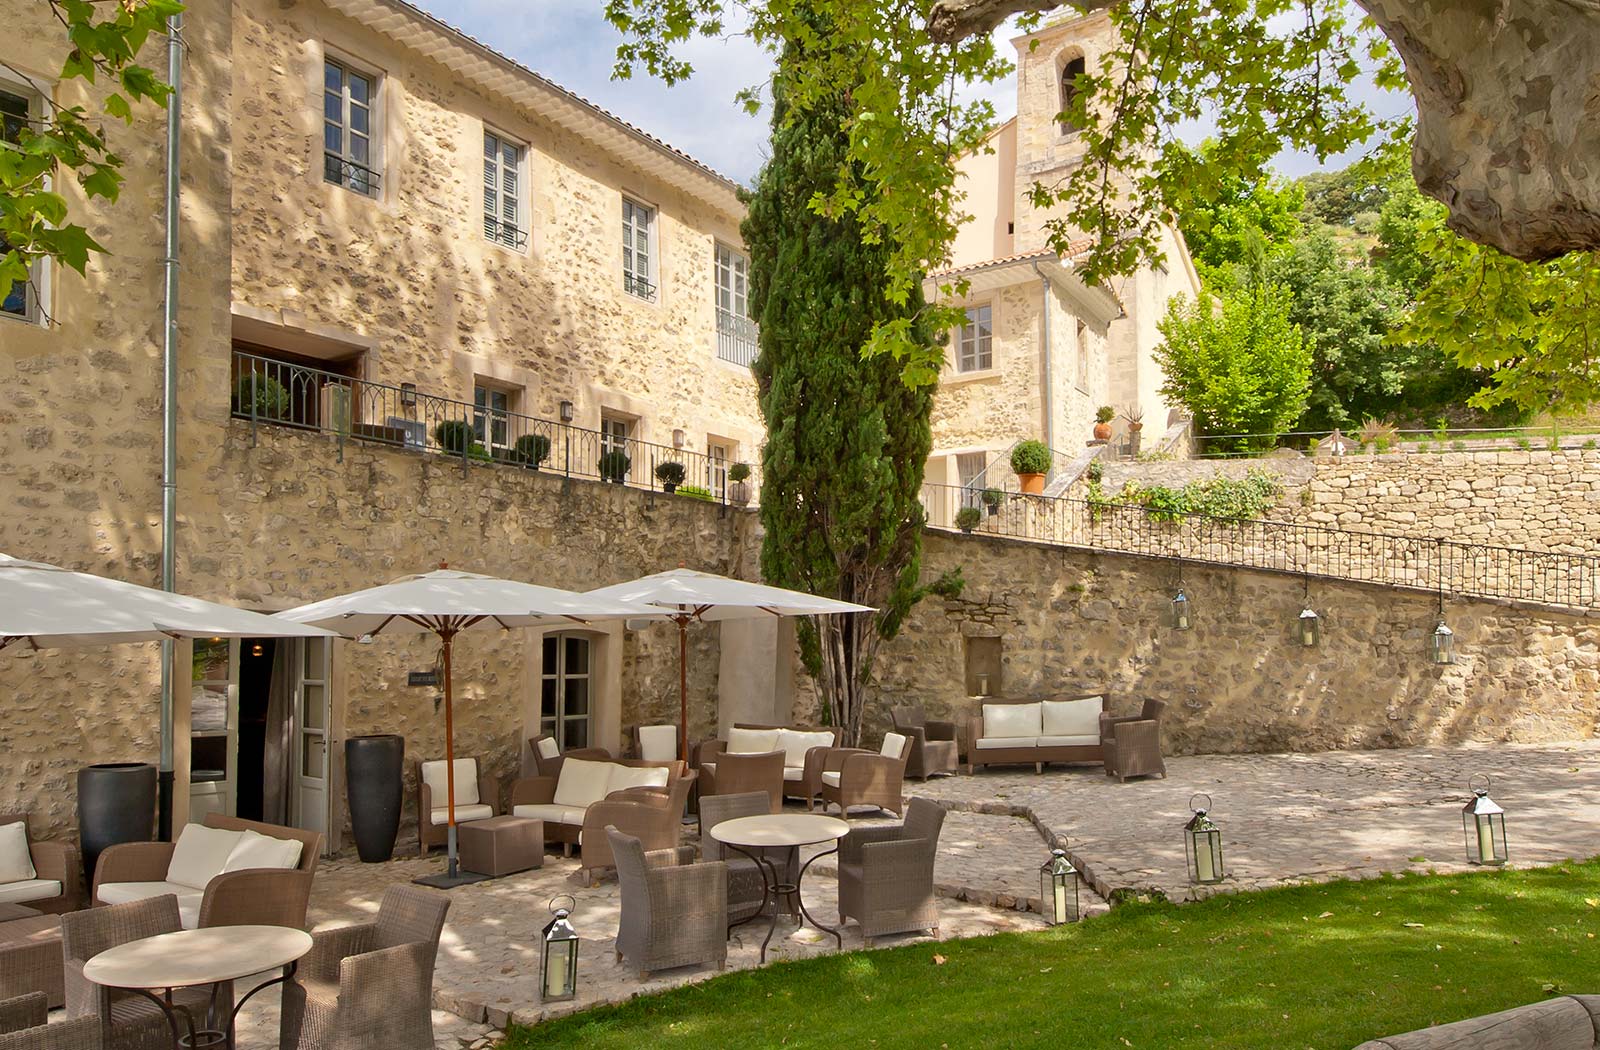 Couvent des minimes, luxury hotel, Provence, luberon, From the Poolside blog